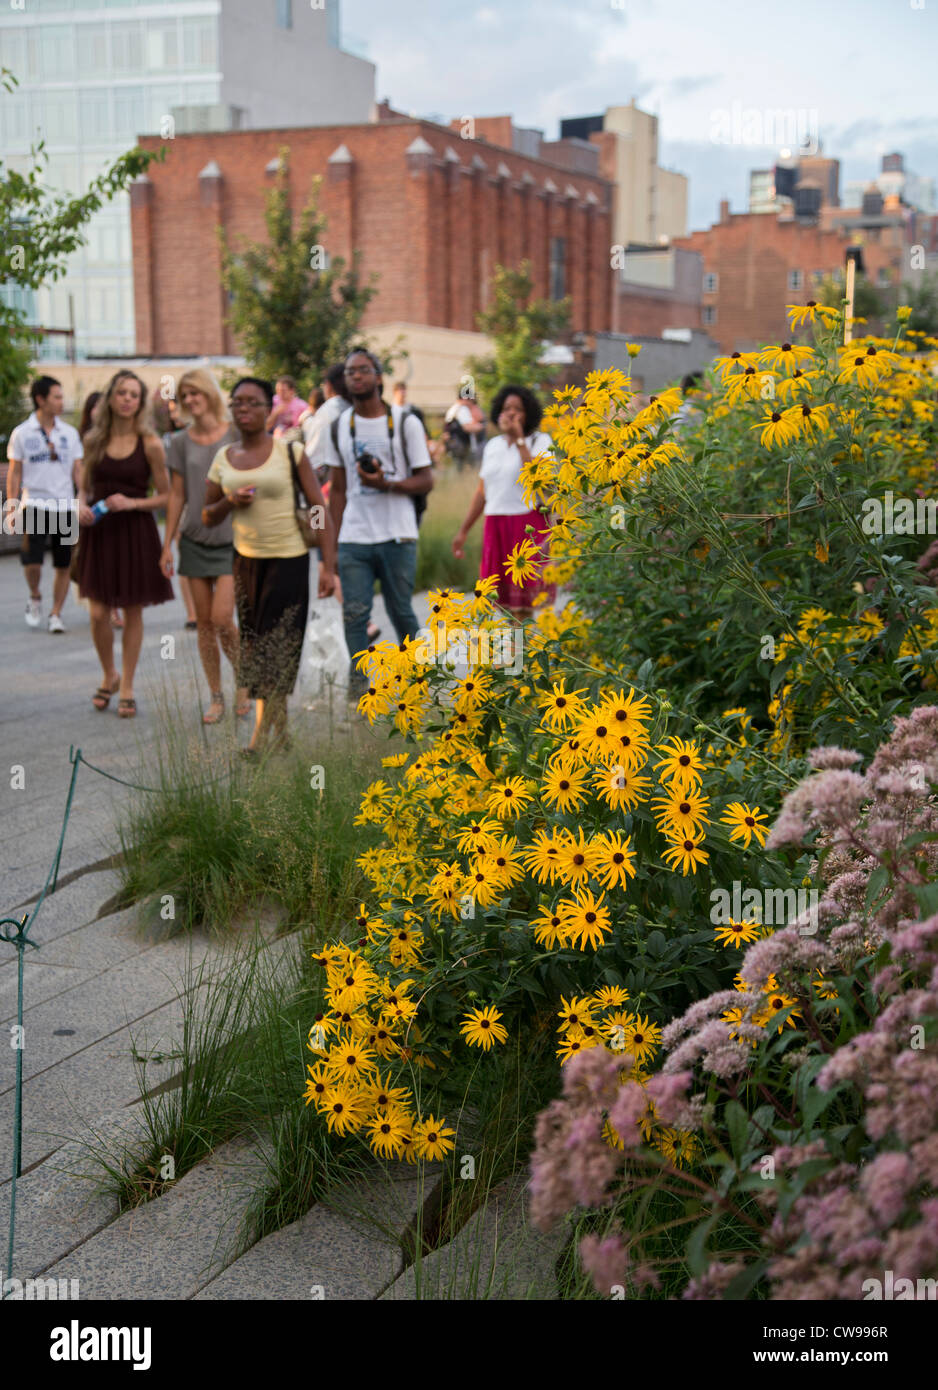 New York, New York - The High Line, an abandoned elevated railroad turned into a linear urban park. Stock Photo